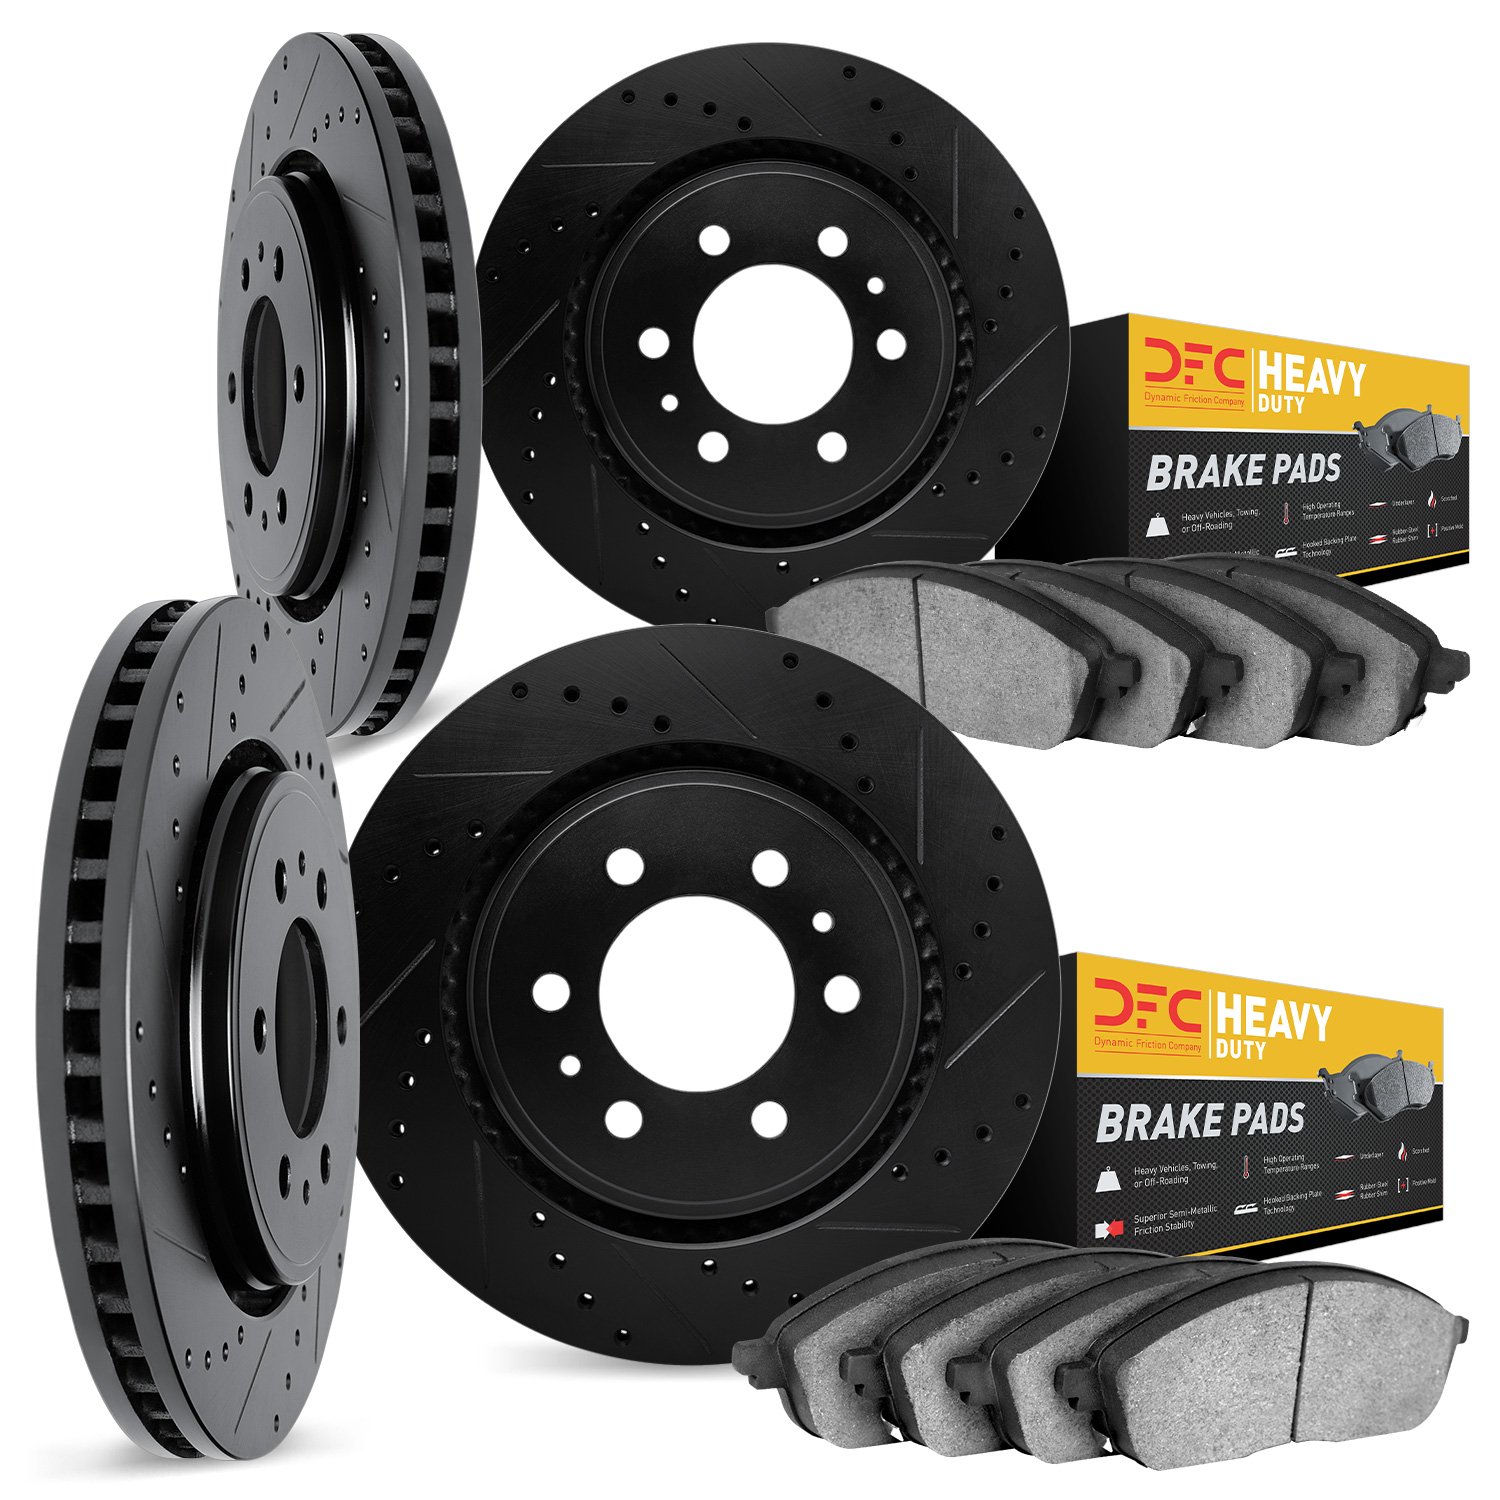 8204-99077 Drilled/Slotted Rotors w/Heavy-Duty Brake Pads Kit [Silver], 2004-2008 Ford/Lincoln/Mercury/Mazda, Position: Front an